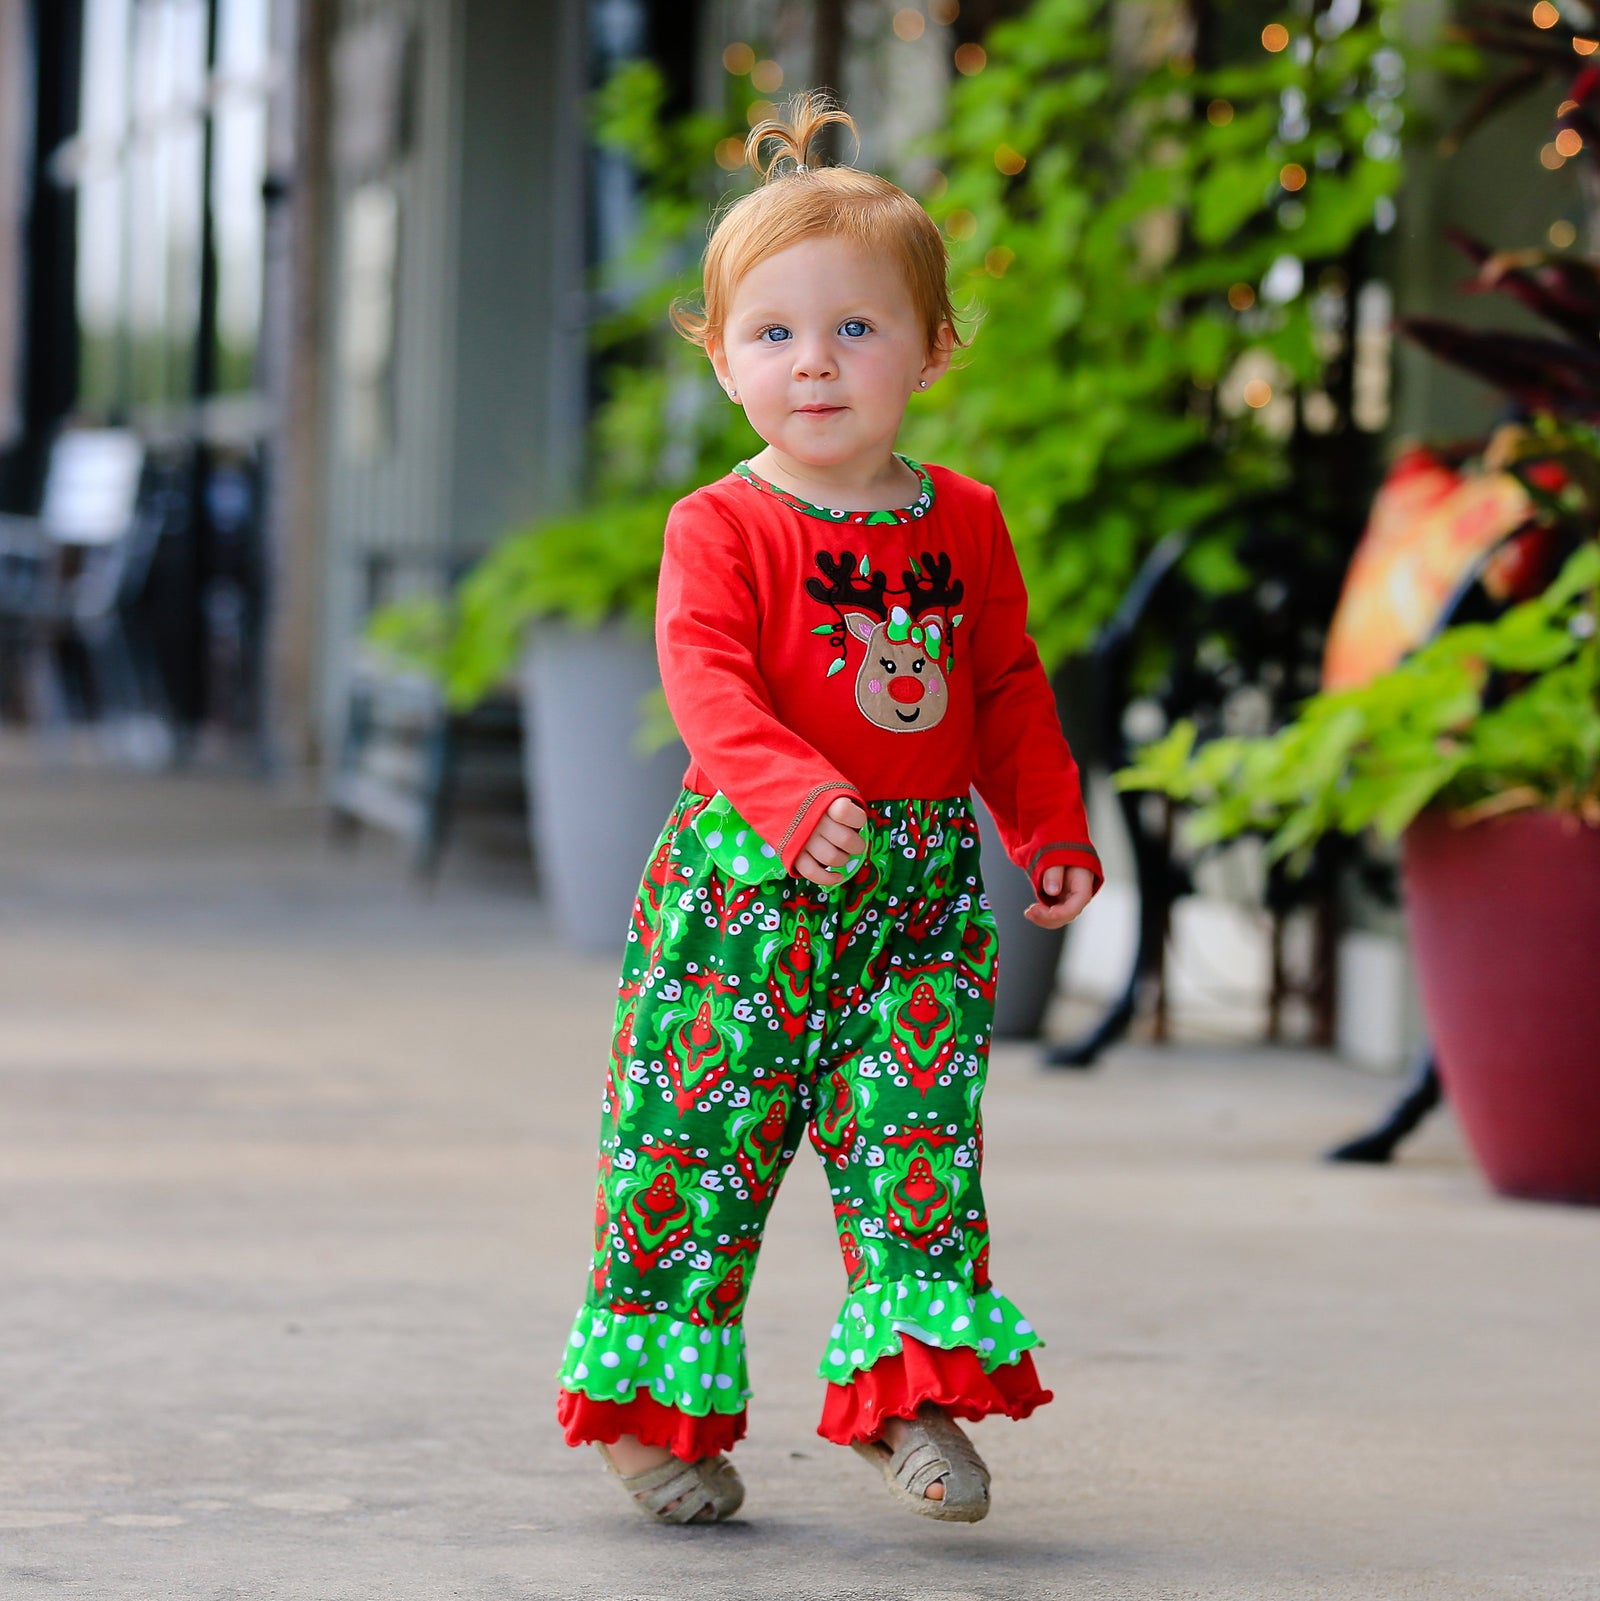 Red & Green Damask Christmas Tree Rudolph Reindeer Baby Girls Romper for 6-24 Months by AnnLoren